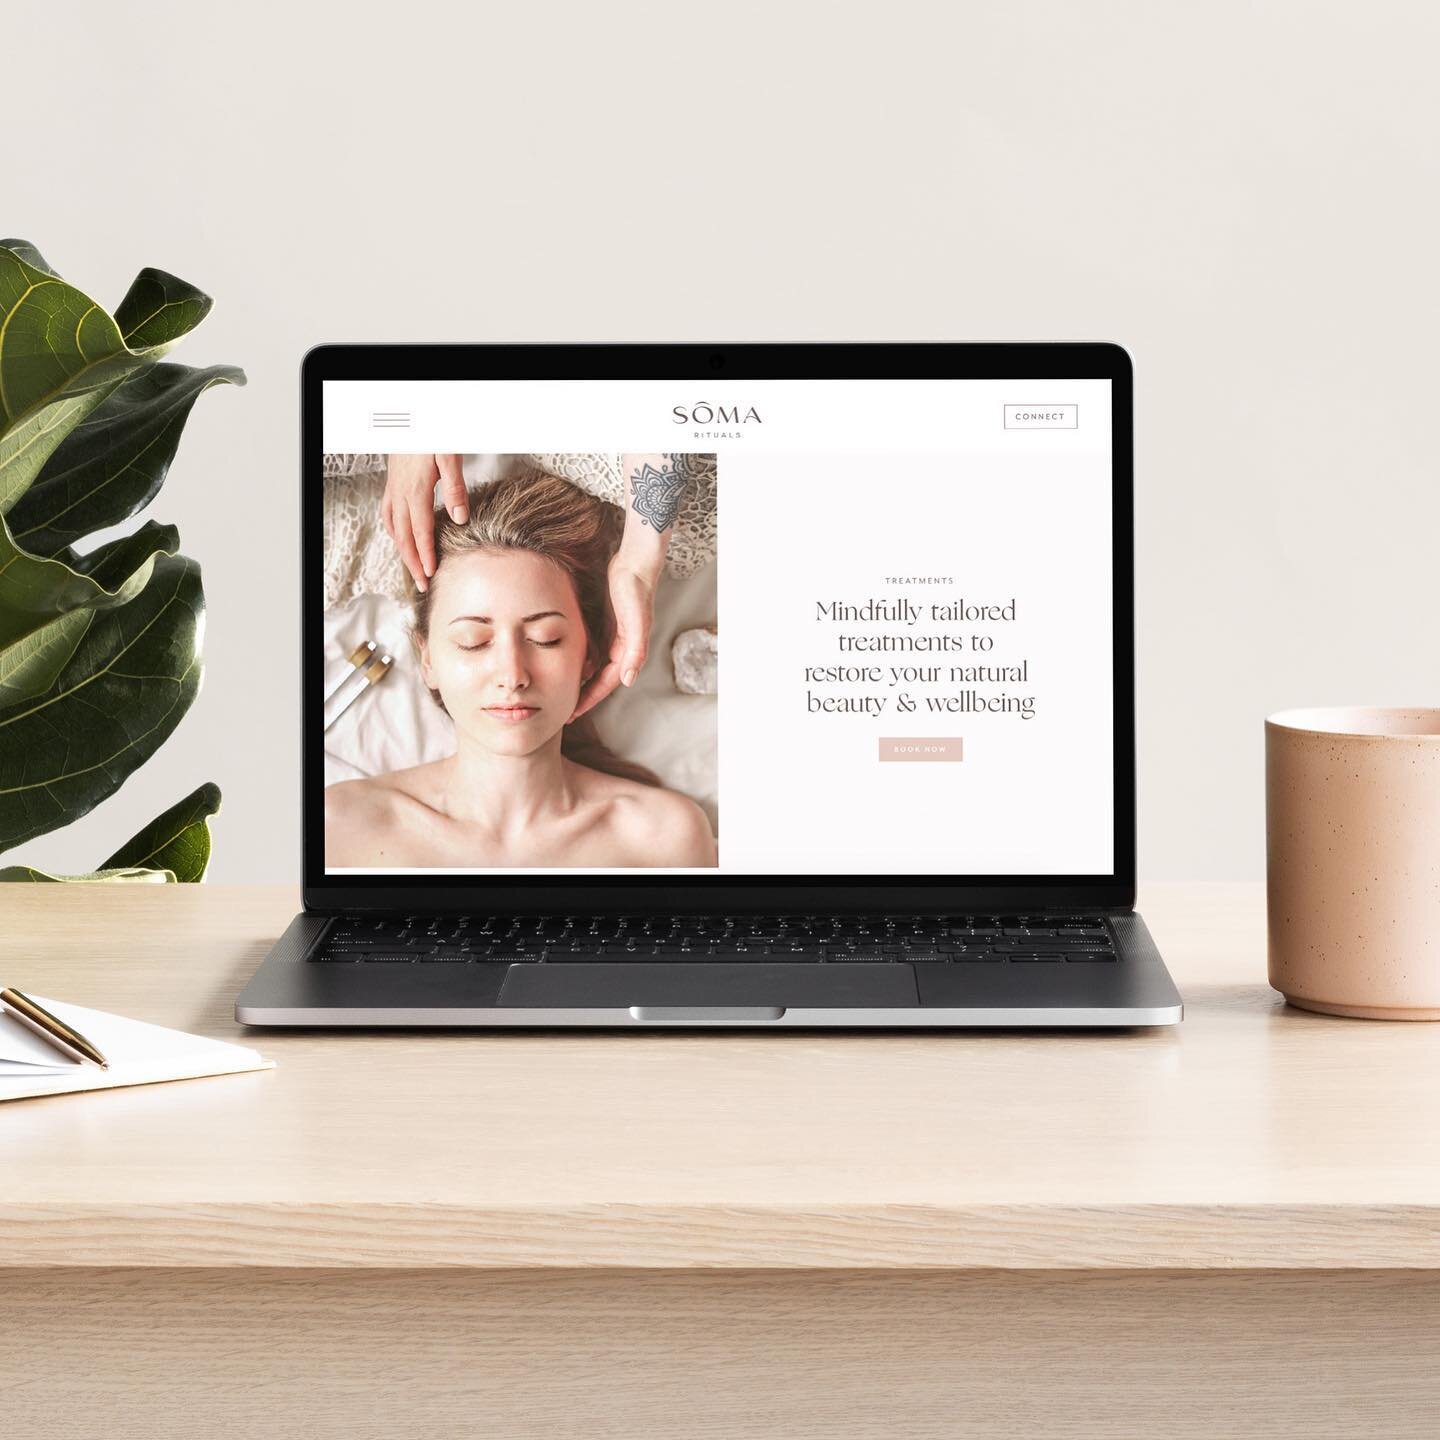 Recent website launch for Soma Rituals ✨ A holistic atelier offering natural beauty and wellness treatments in London 🌿

#branddesign
#webdesigner
#holisticfacials
#squarespace
#webdesigner
#squarespacedesigner
#designer
#brandidentity
#squarespace
